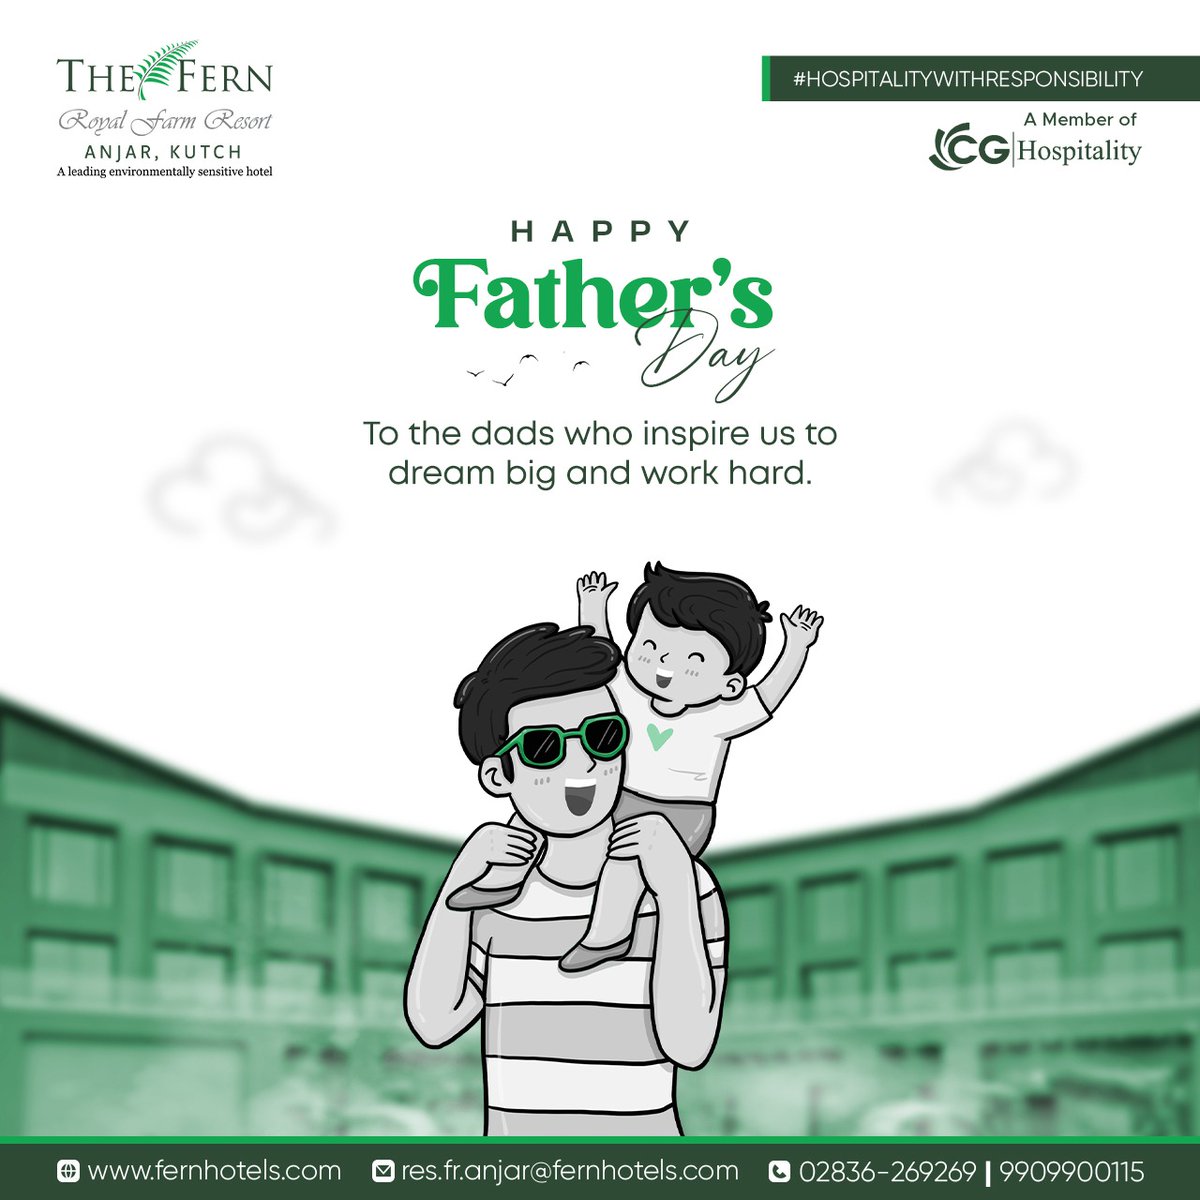 Let's raise a toast to the greatest fathers who effortlessly turn ordinary moments into extraordinary memories.
Cheers to the greatest dads who make every moment count! 

Book now- fernhotels.com/the-fern-royal…

#FernAnjar #HospitalityWithResponsibility #HappyFathersDay